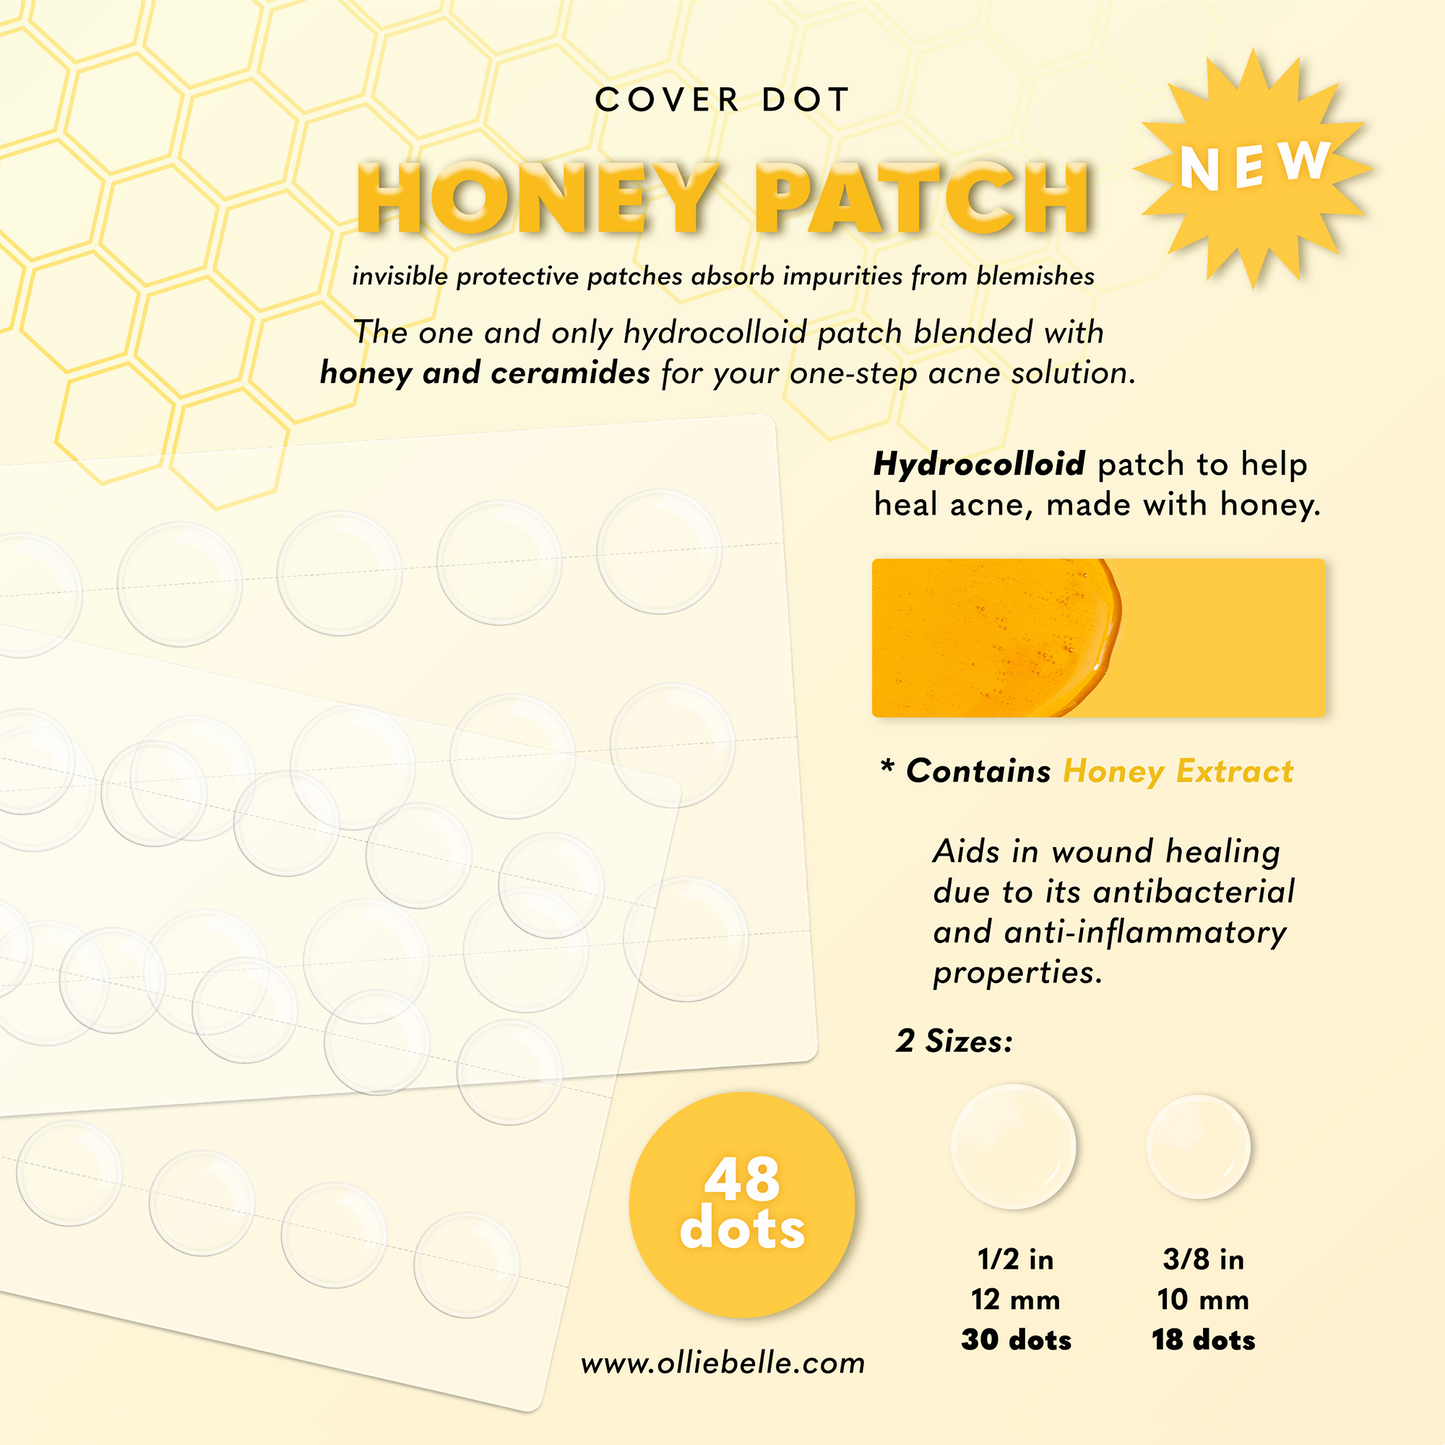 Cover Dot 48 Acne Patch Description 10 mm 12mm Honey Hydrocolloid Anti-bacterial and Anti-inflammatory Patches